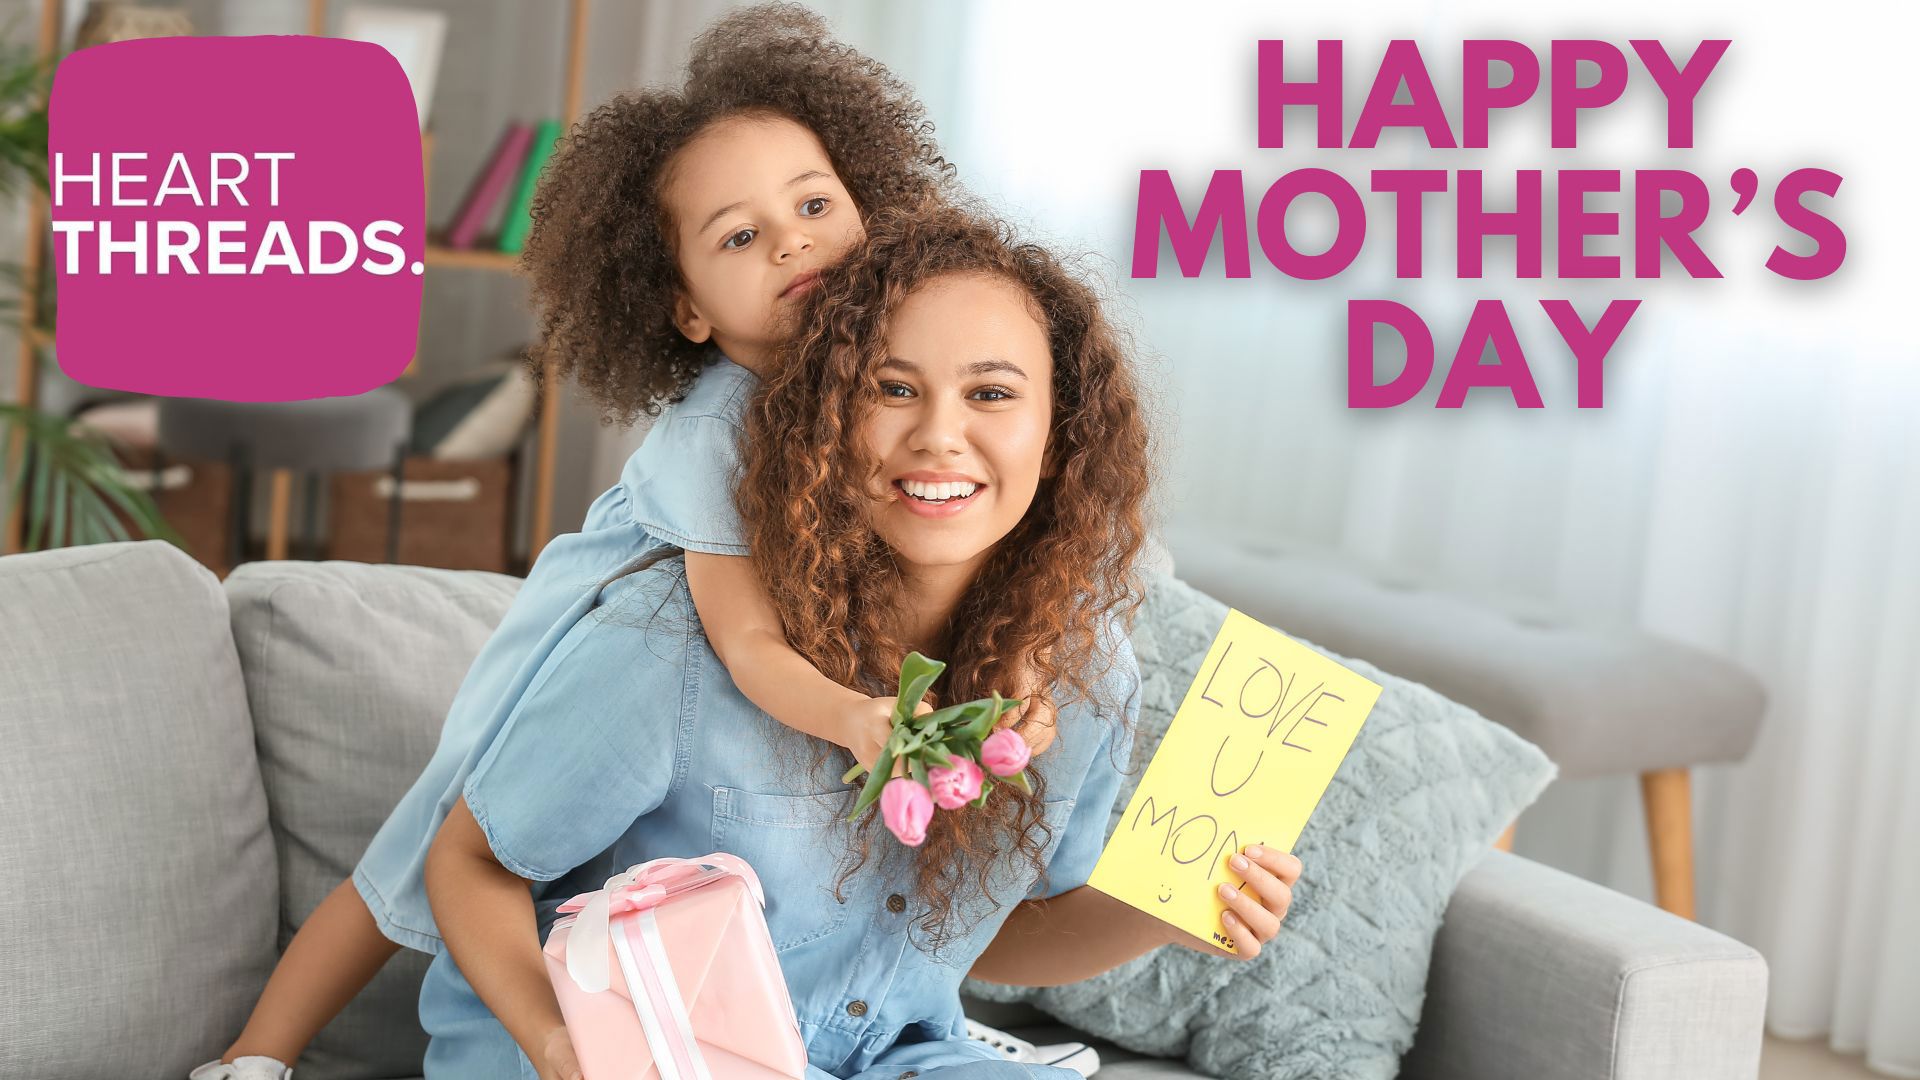 It is time to show love and appreciation for all the moms out there. Heartwarming stories of motherhood and those women who go above and beyond.